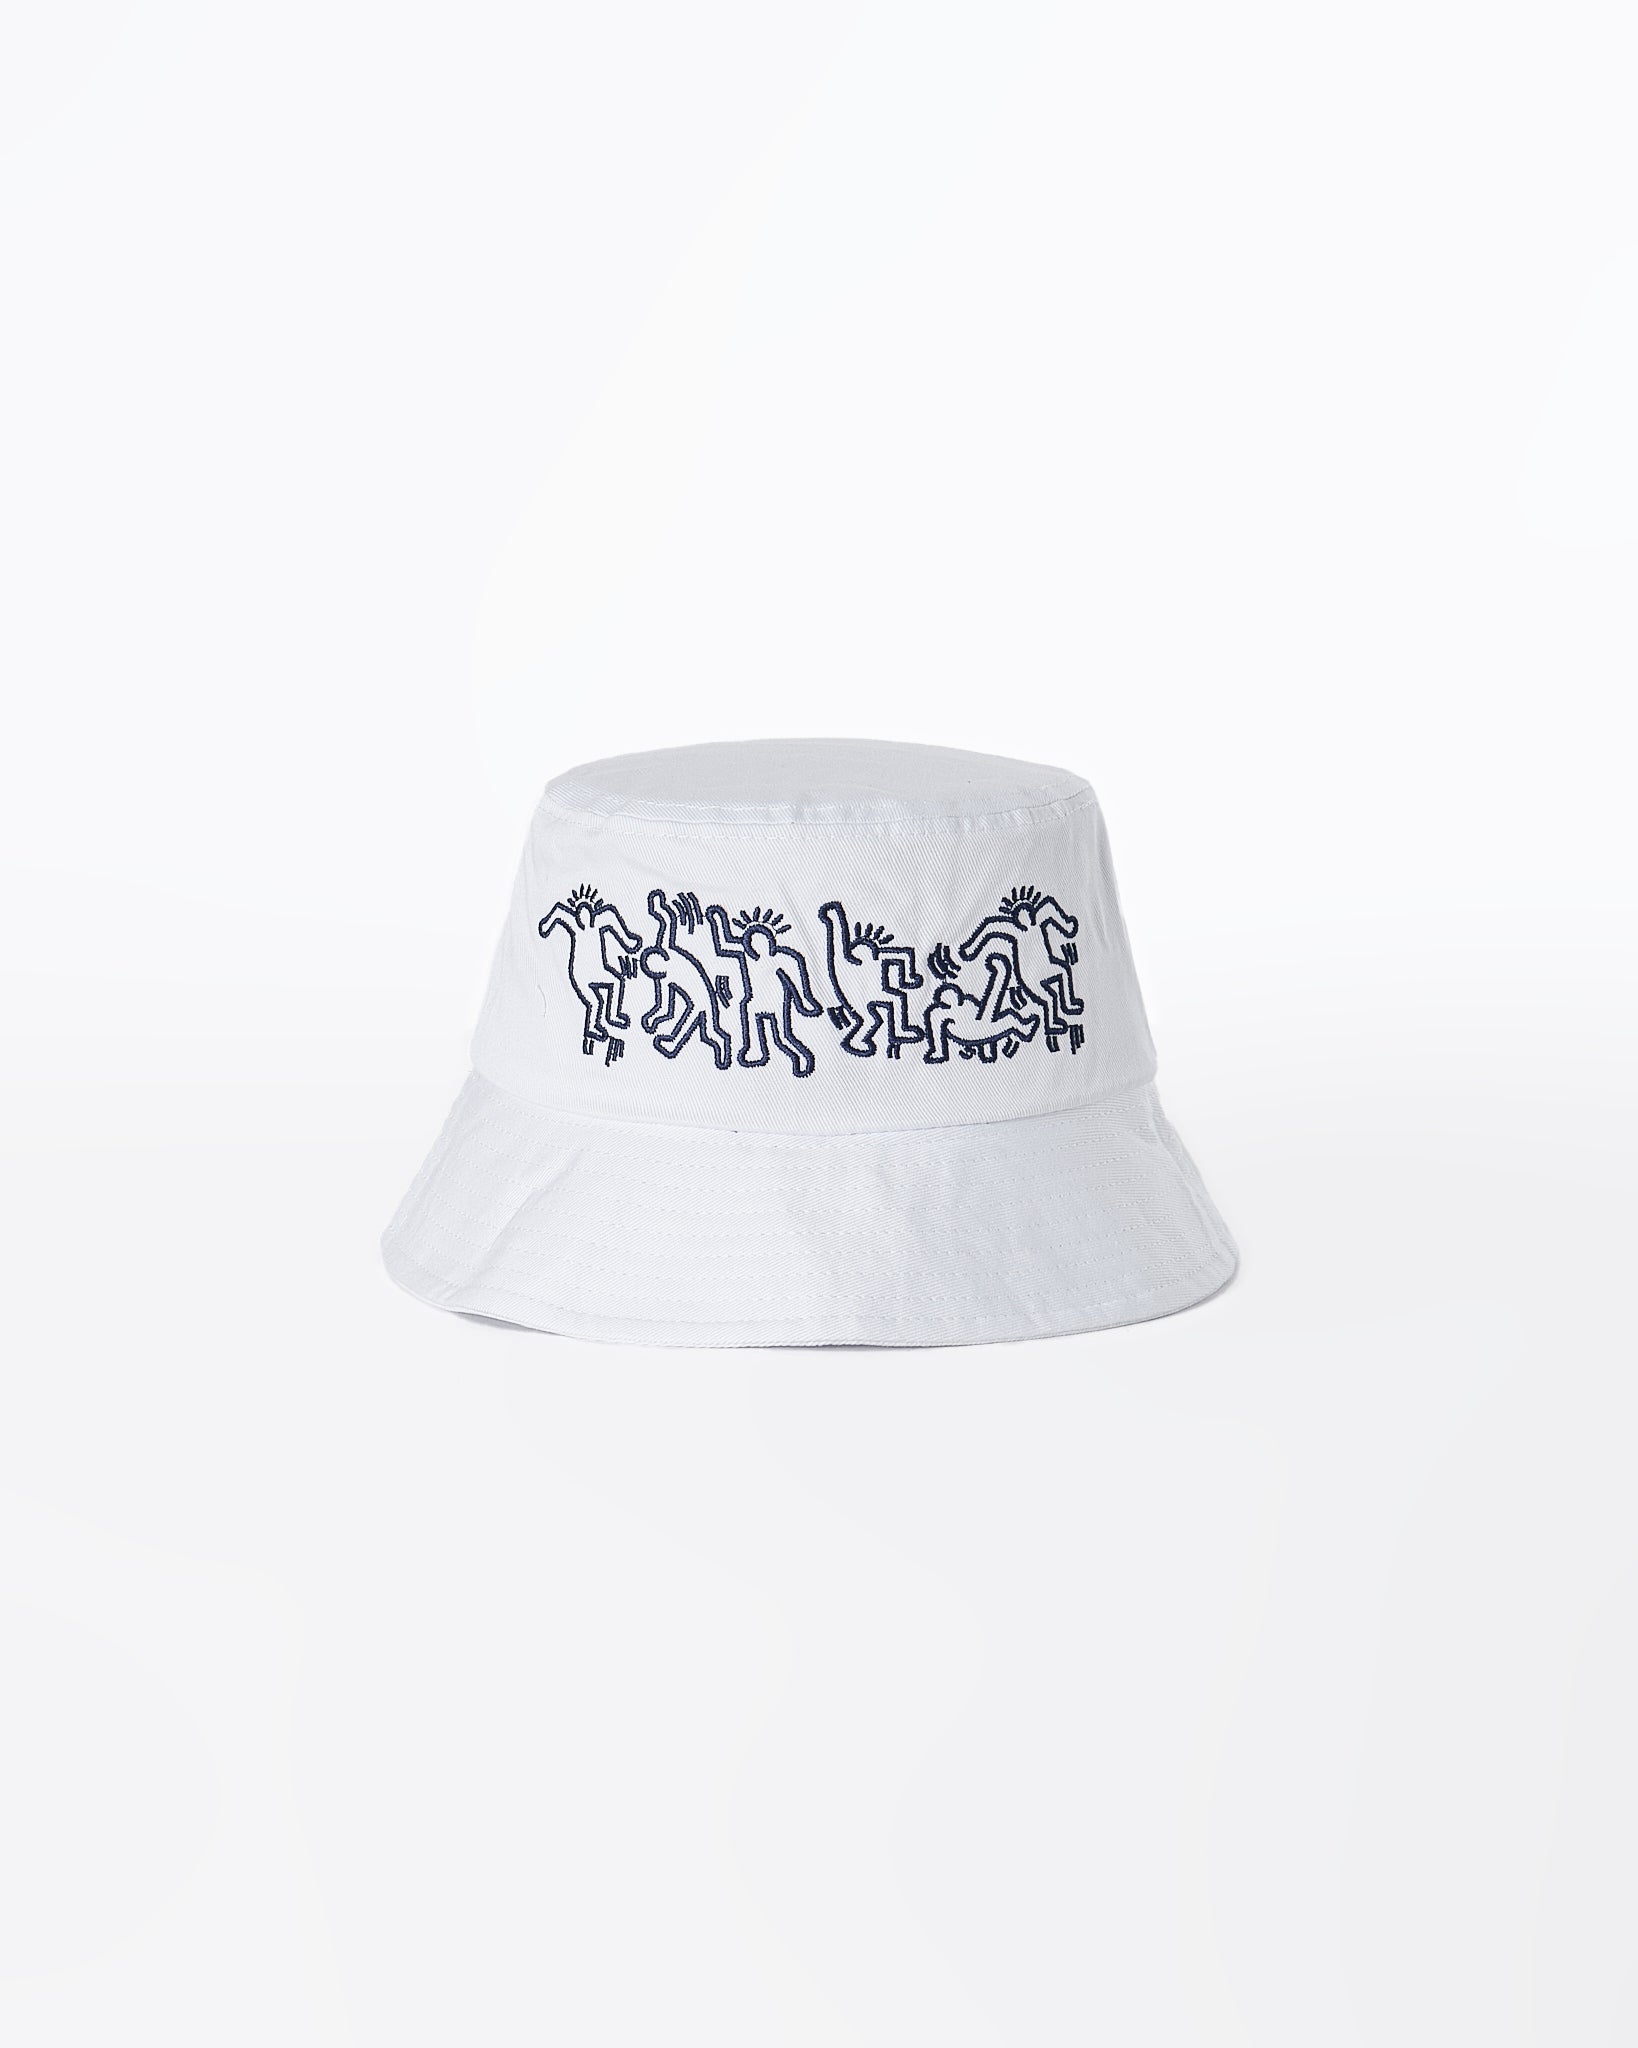 Tommy White Bucket Hat 13.90 - MOI OUTFIT